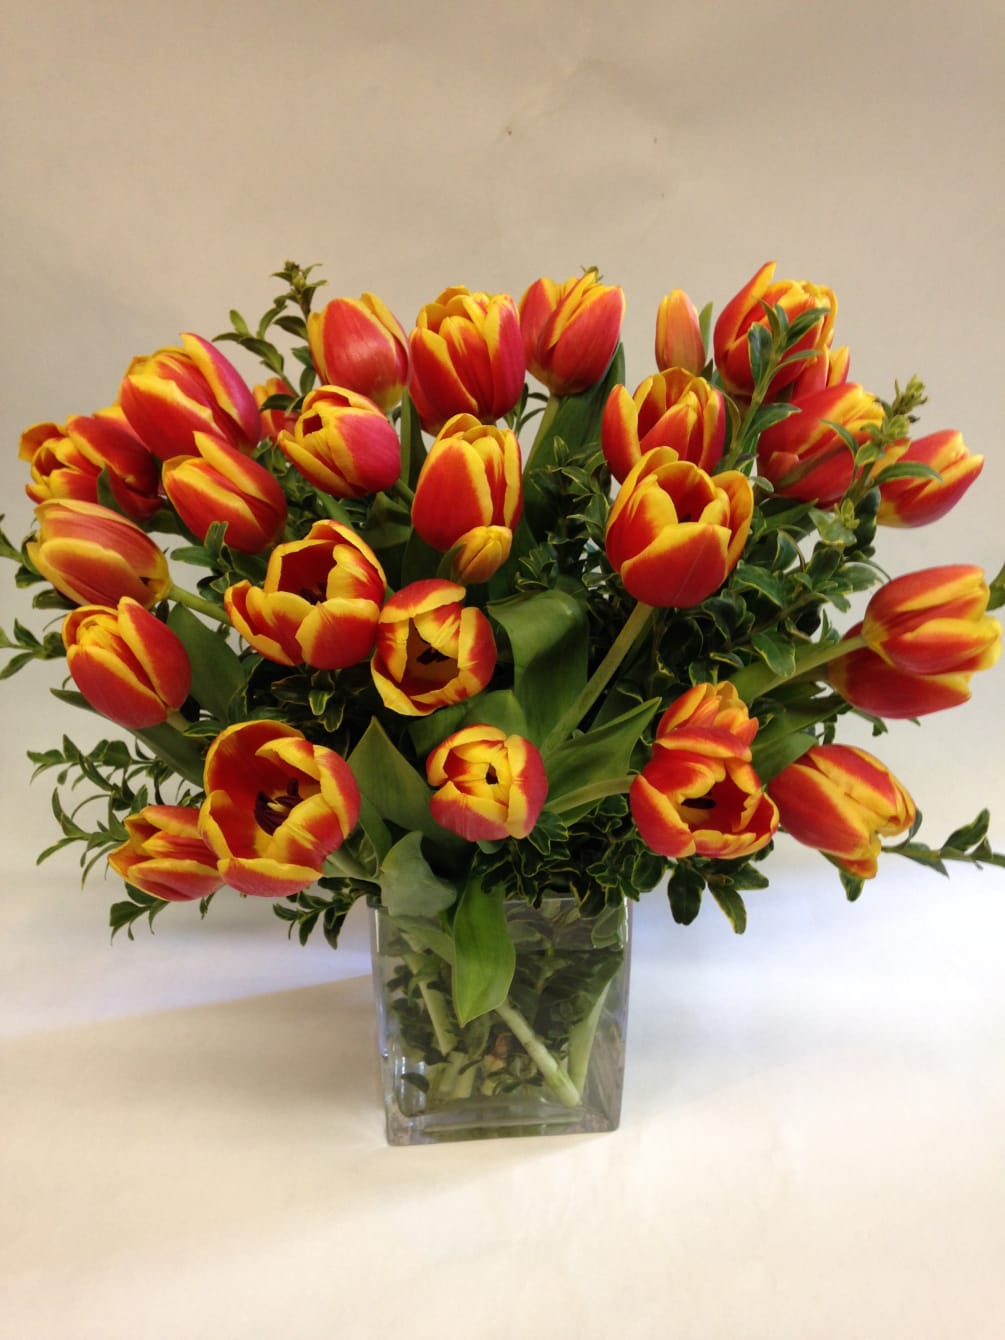 This tulip arrangement can come in a variety of colors: orange, yellow